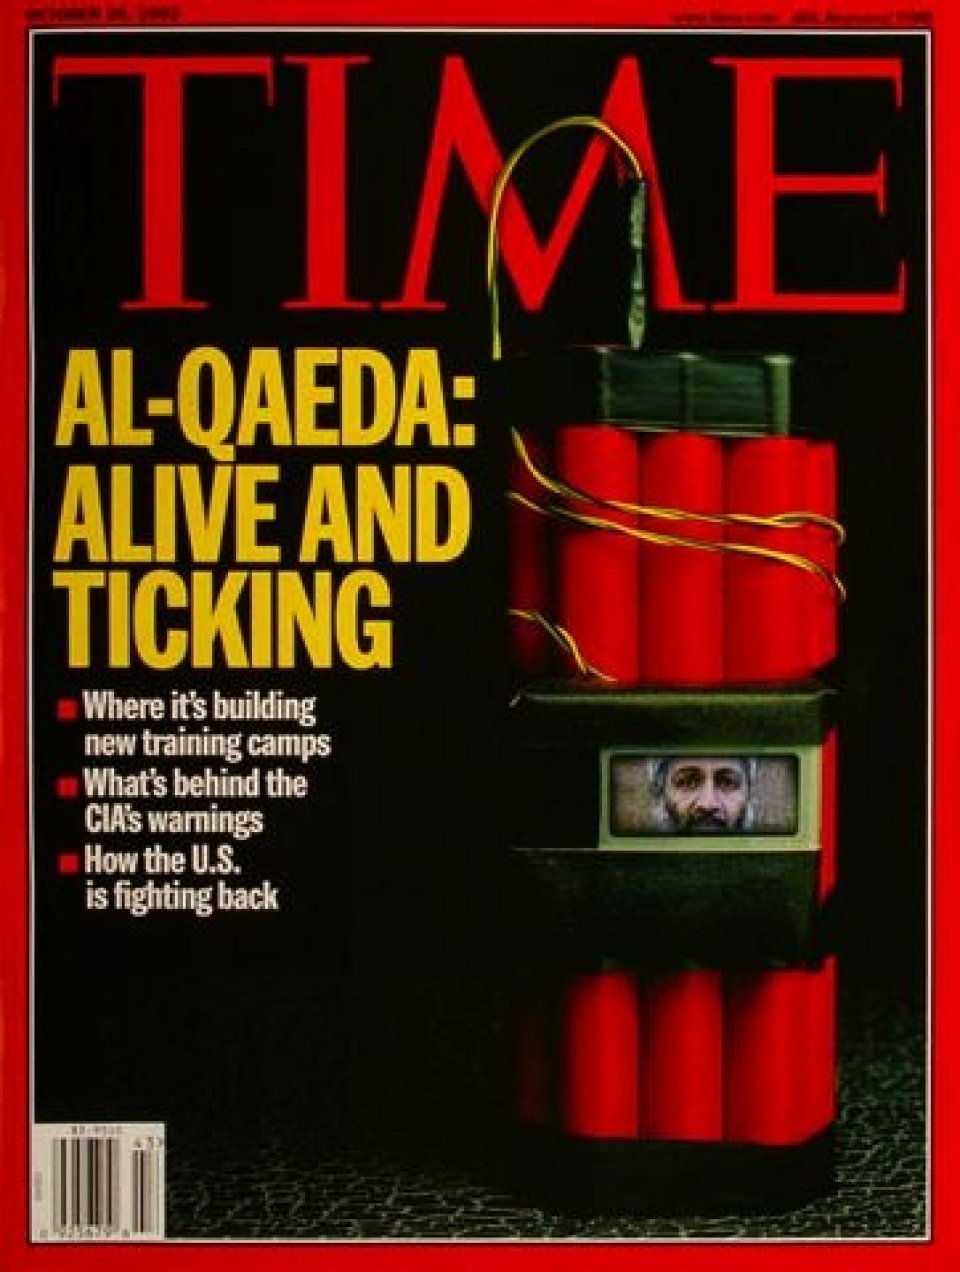 Time Magazine Cover